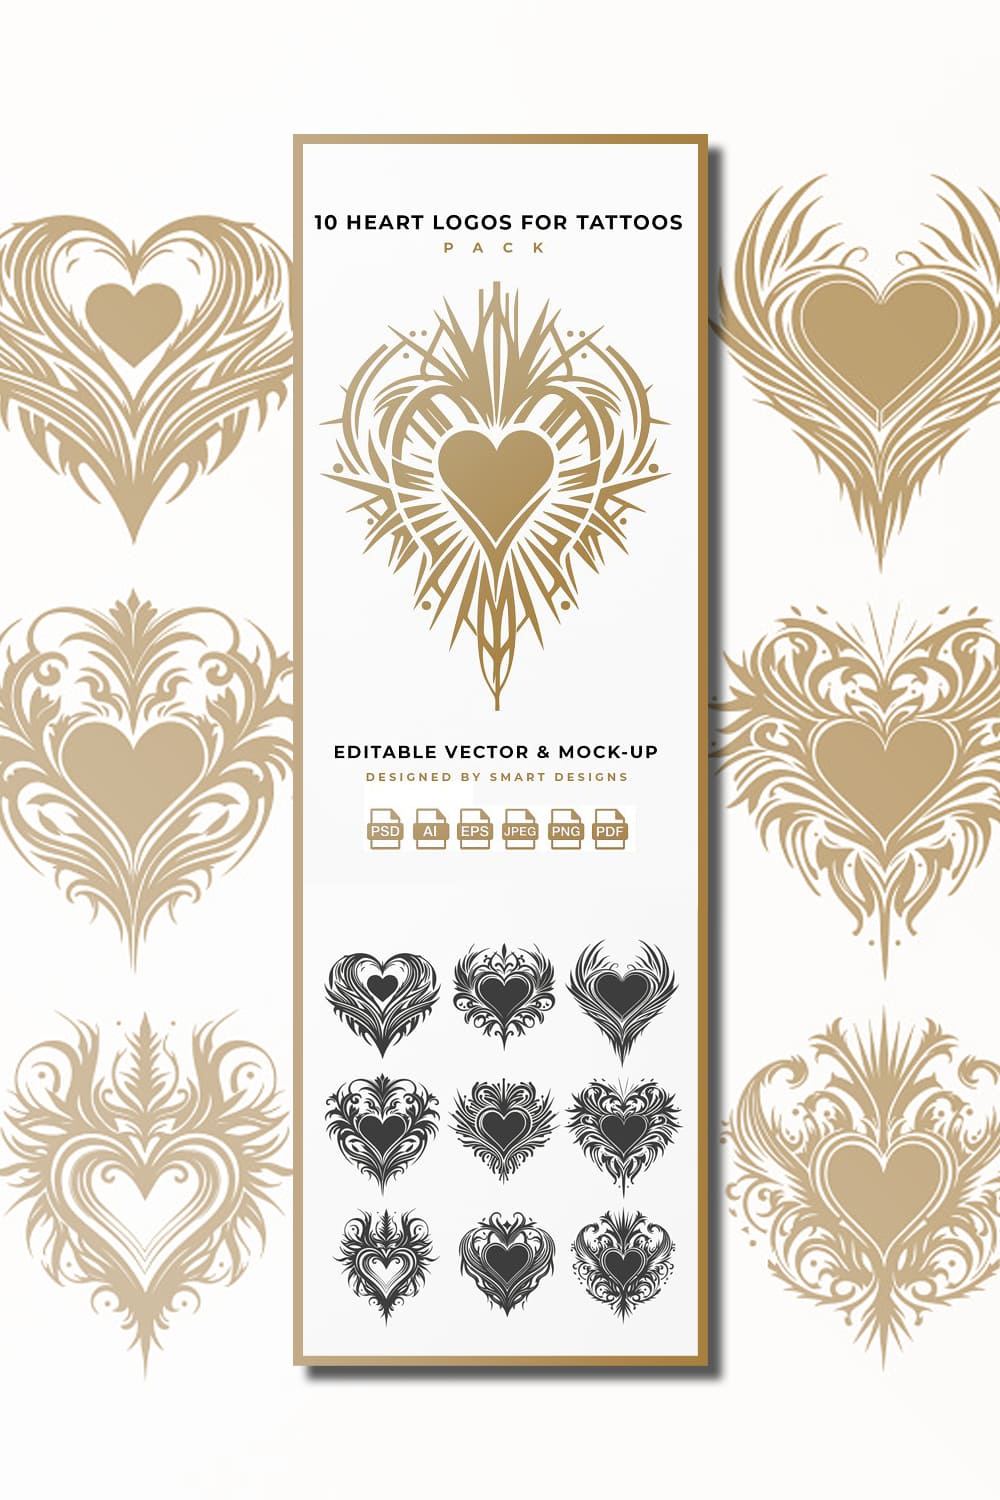 Golden and black Heart Logos for Tattoos Pack.